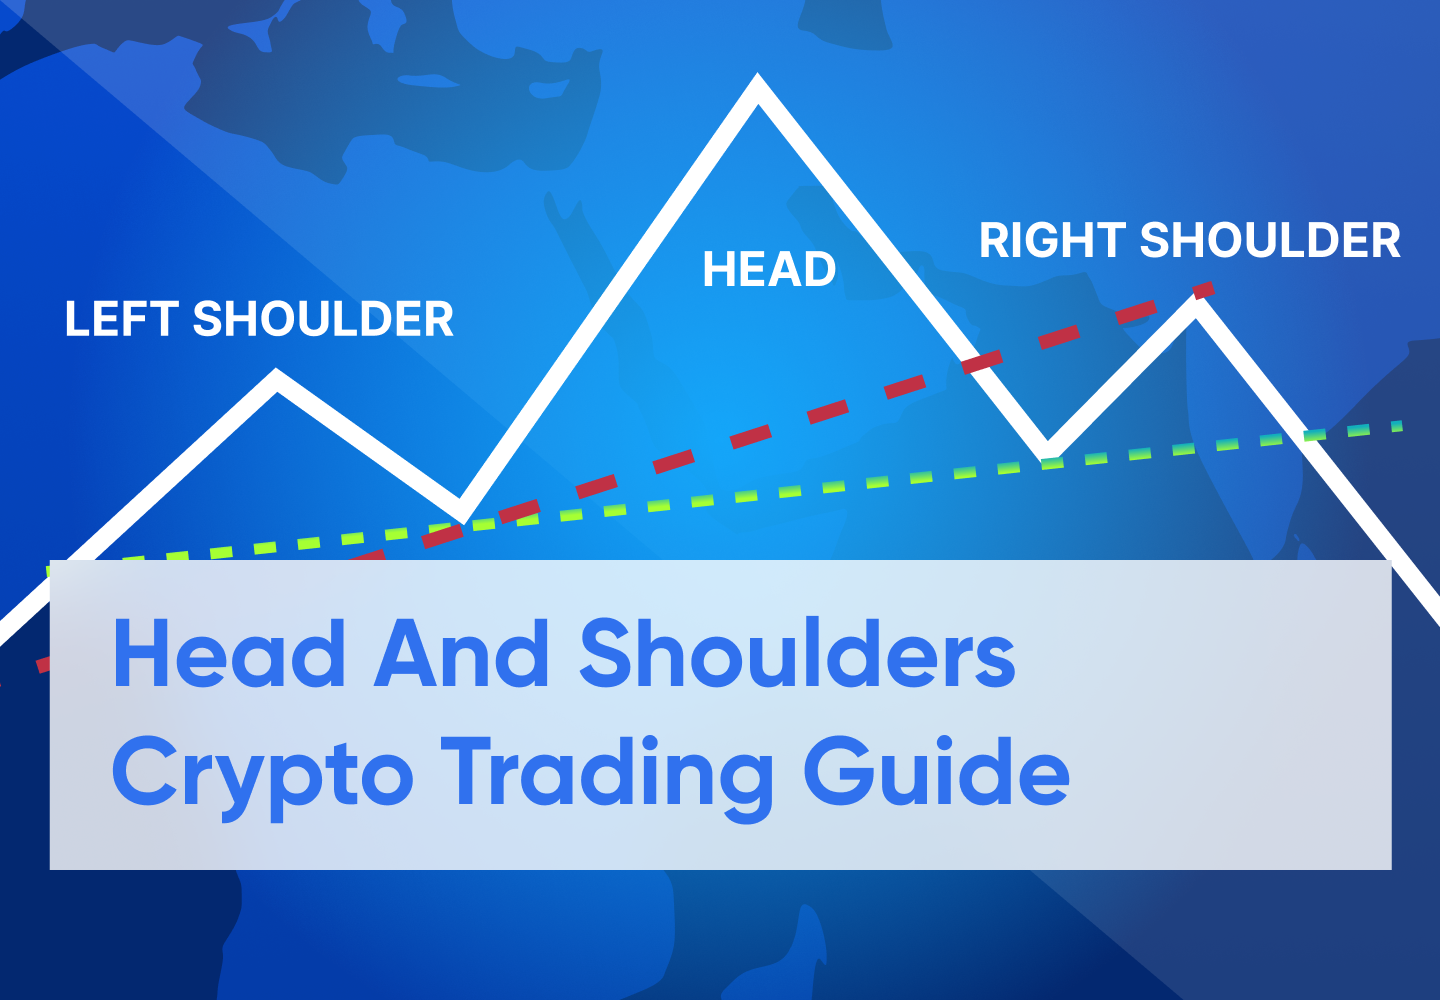 What Is A Head And Shoulders Chart Pattern?